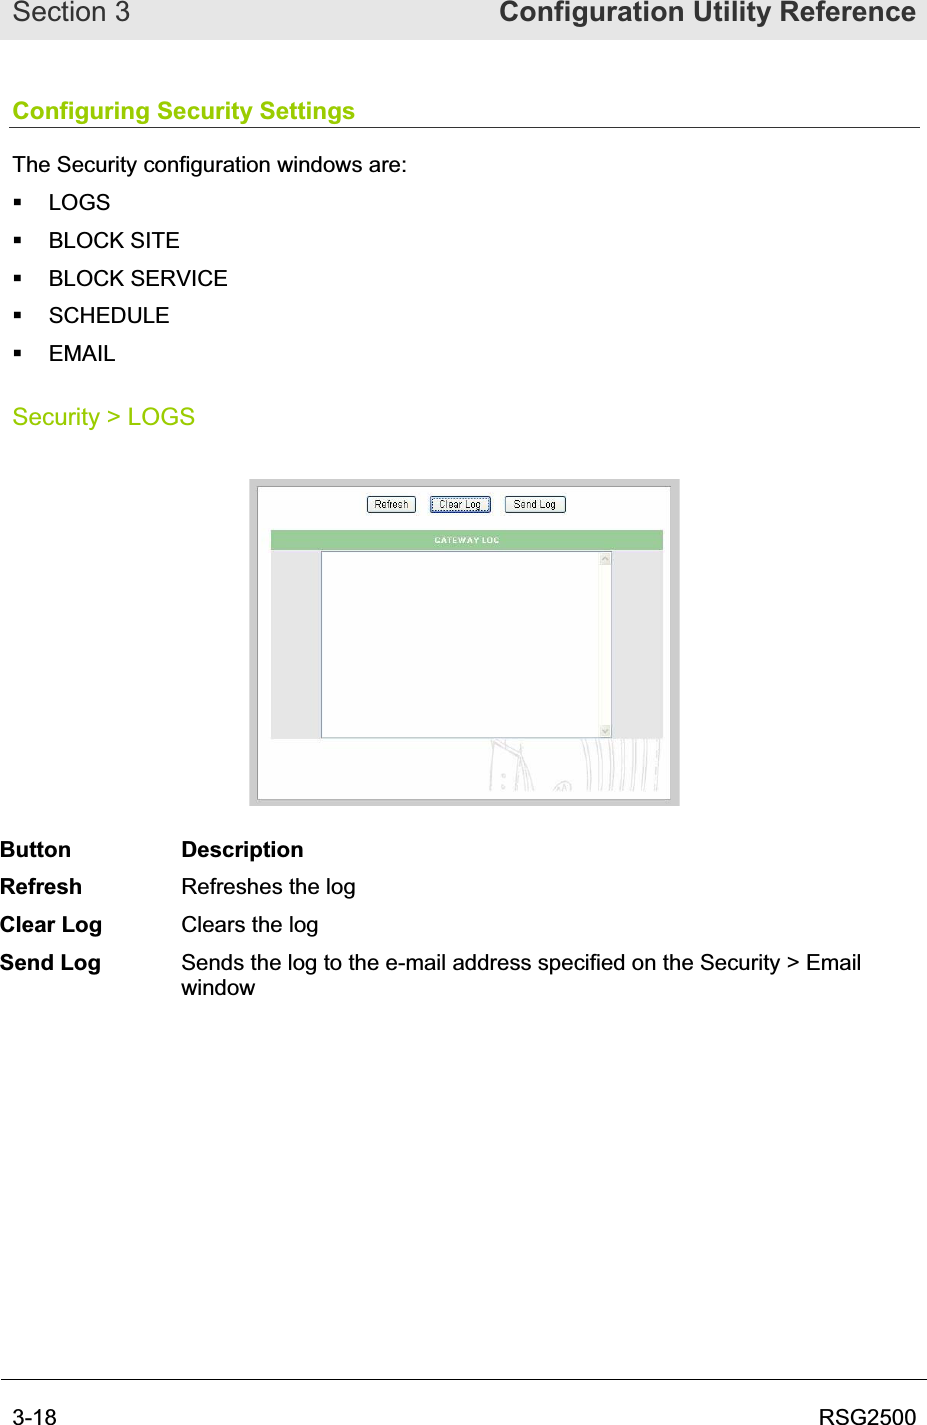 Section 3  Configuration Utility Reference3-18  RSG2500Configuring Security Settings The Security configuration windows are:  LOGS  BLOCK SITE  BLOCK SERVICE  SCHEDULE  EMAIL Security &gt; LOGS Button Description Refresh Refreshes the log Clear Log  Clears the log Send Log  Sends the log to the e-mail address specified on the Security &gt; Email window